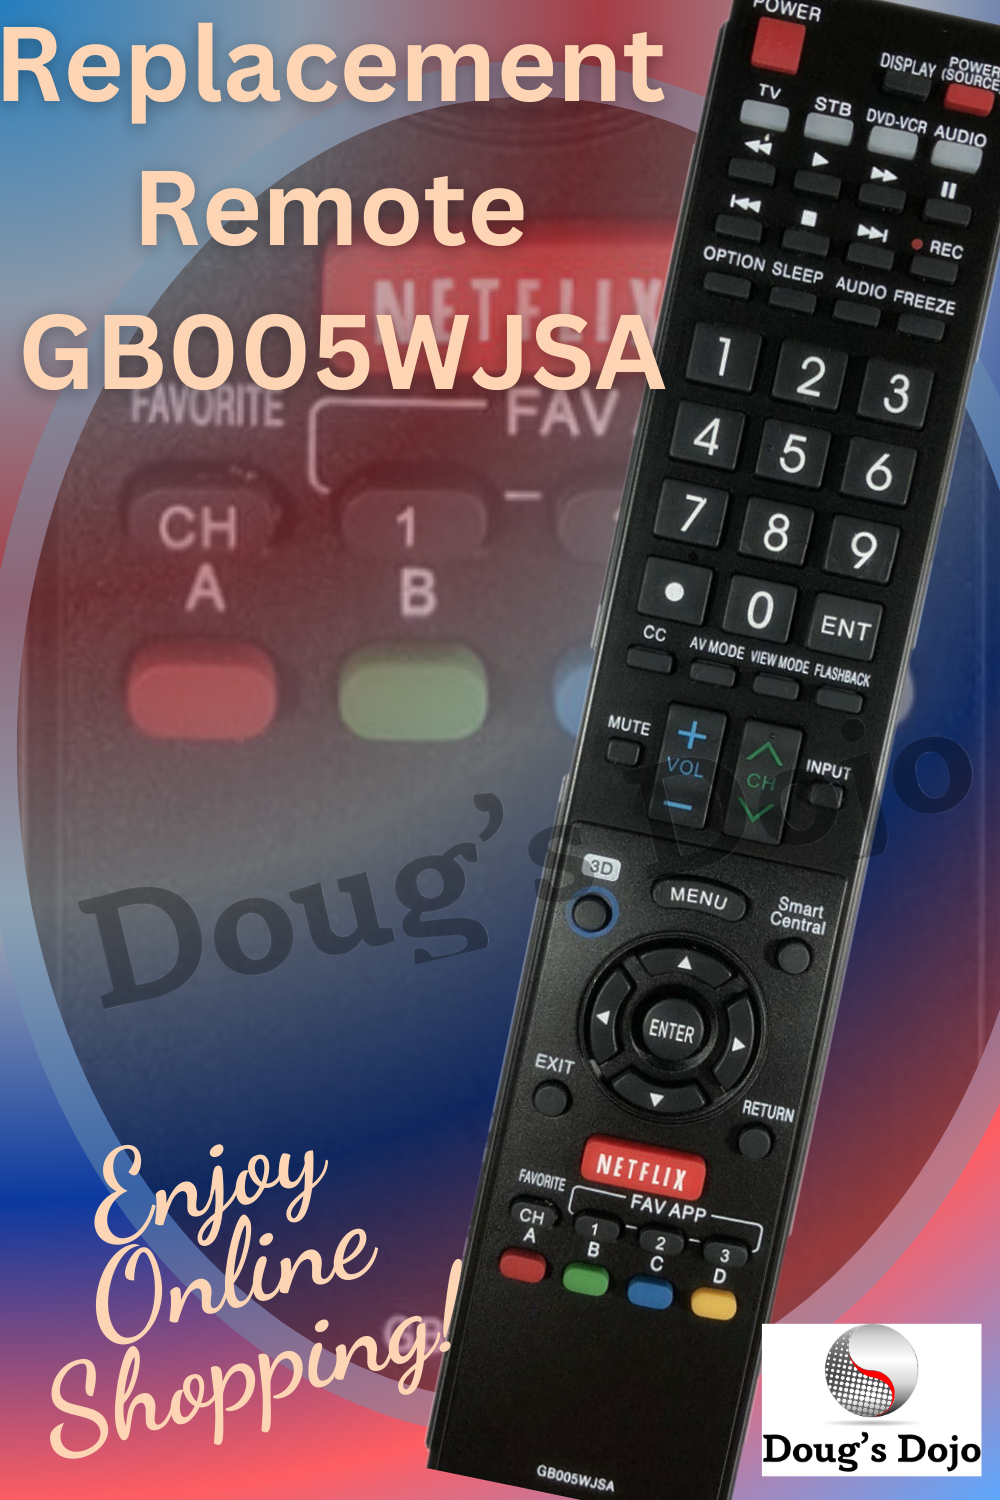 New Sharp Replacement TV Remote GB005WJSA for Sharp AQUOS TV Remote Control